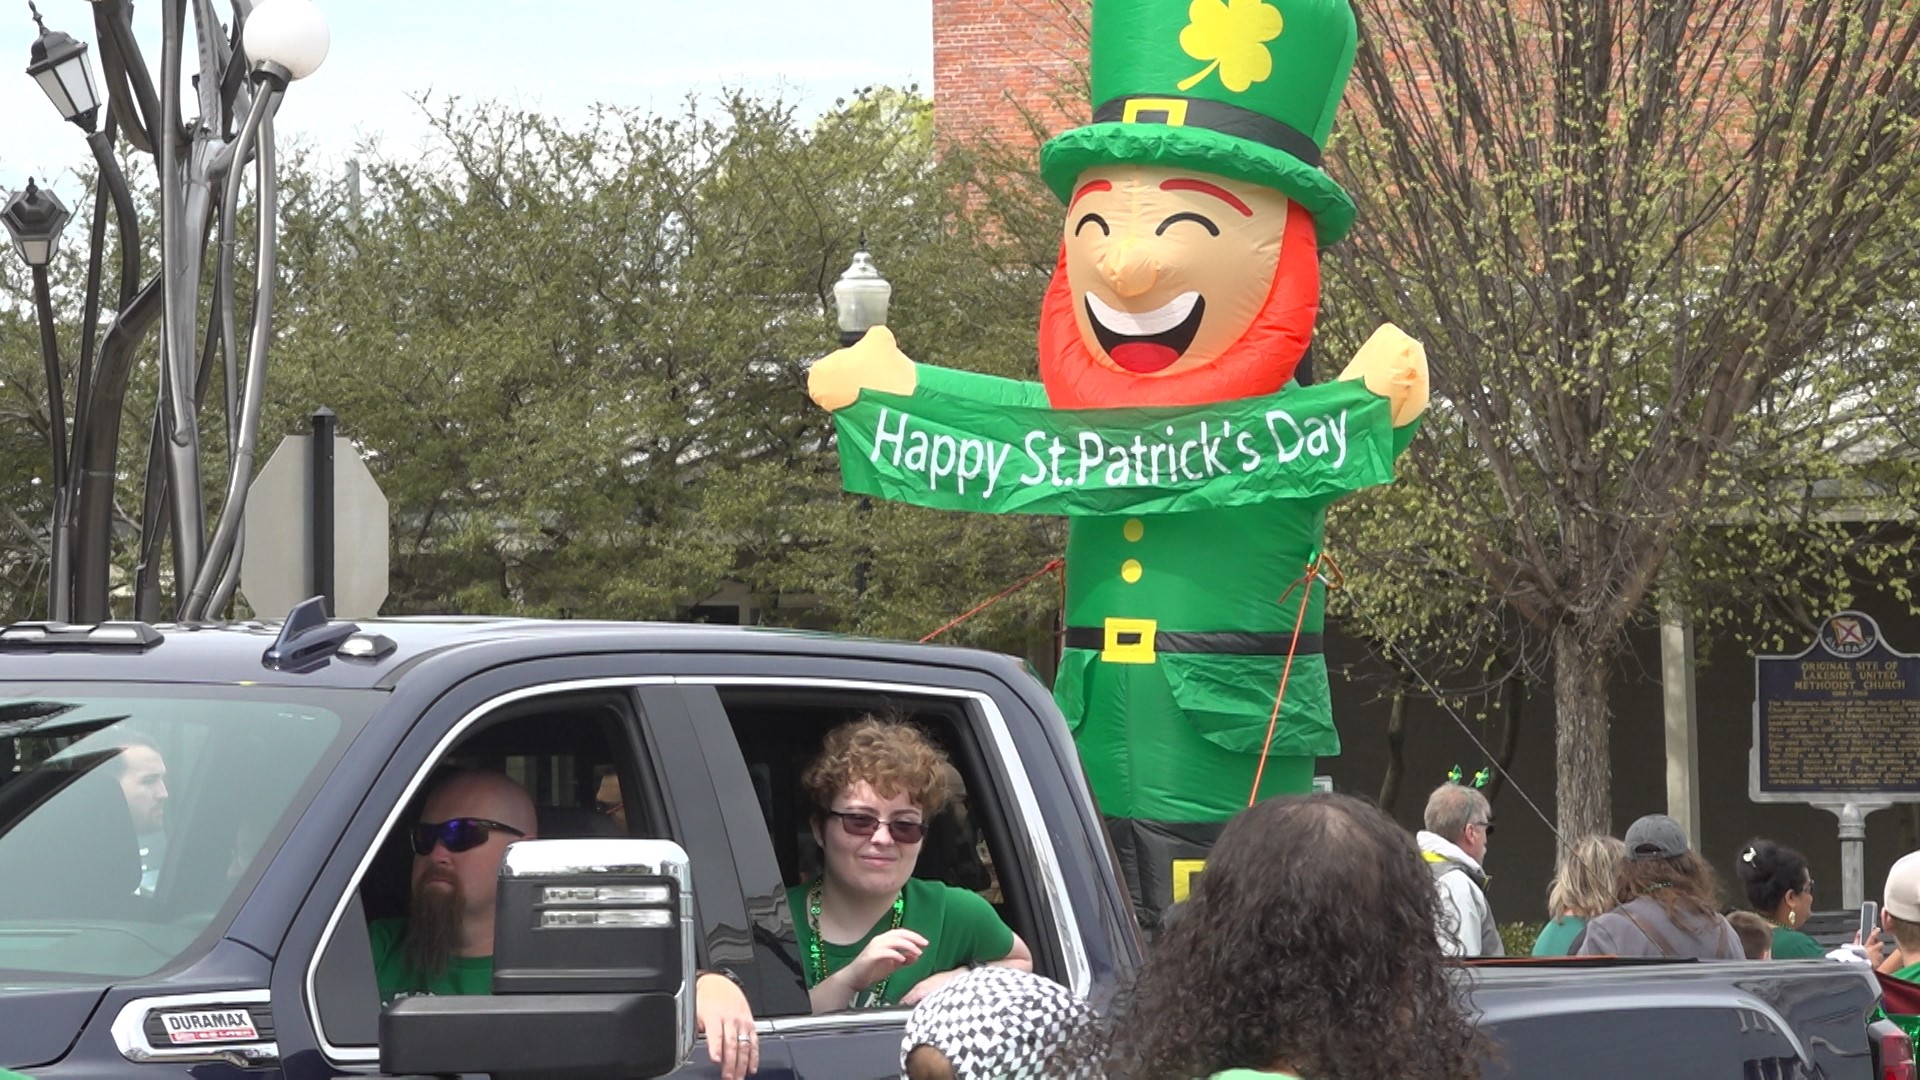 Selected snippets from the Annual Ellen McAnelly Memorial St. Patrick's Day Parade, held March 11, 2023 in Downtown Huntsville.